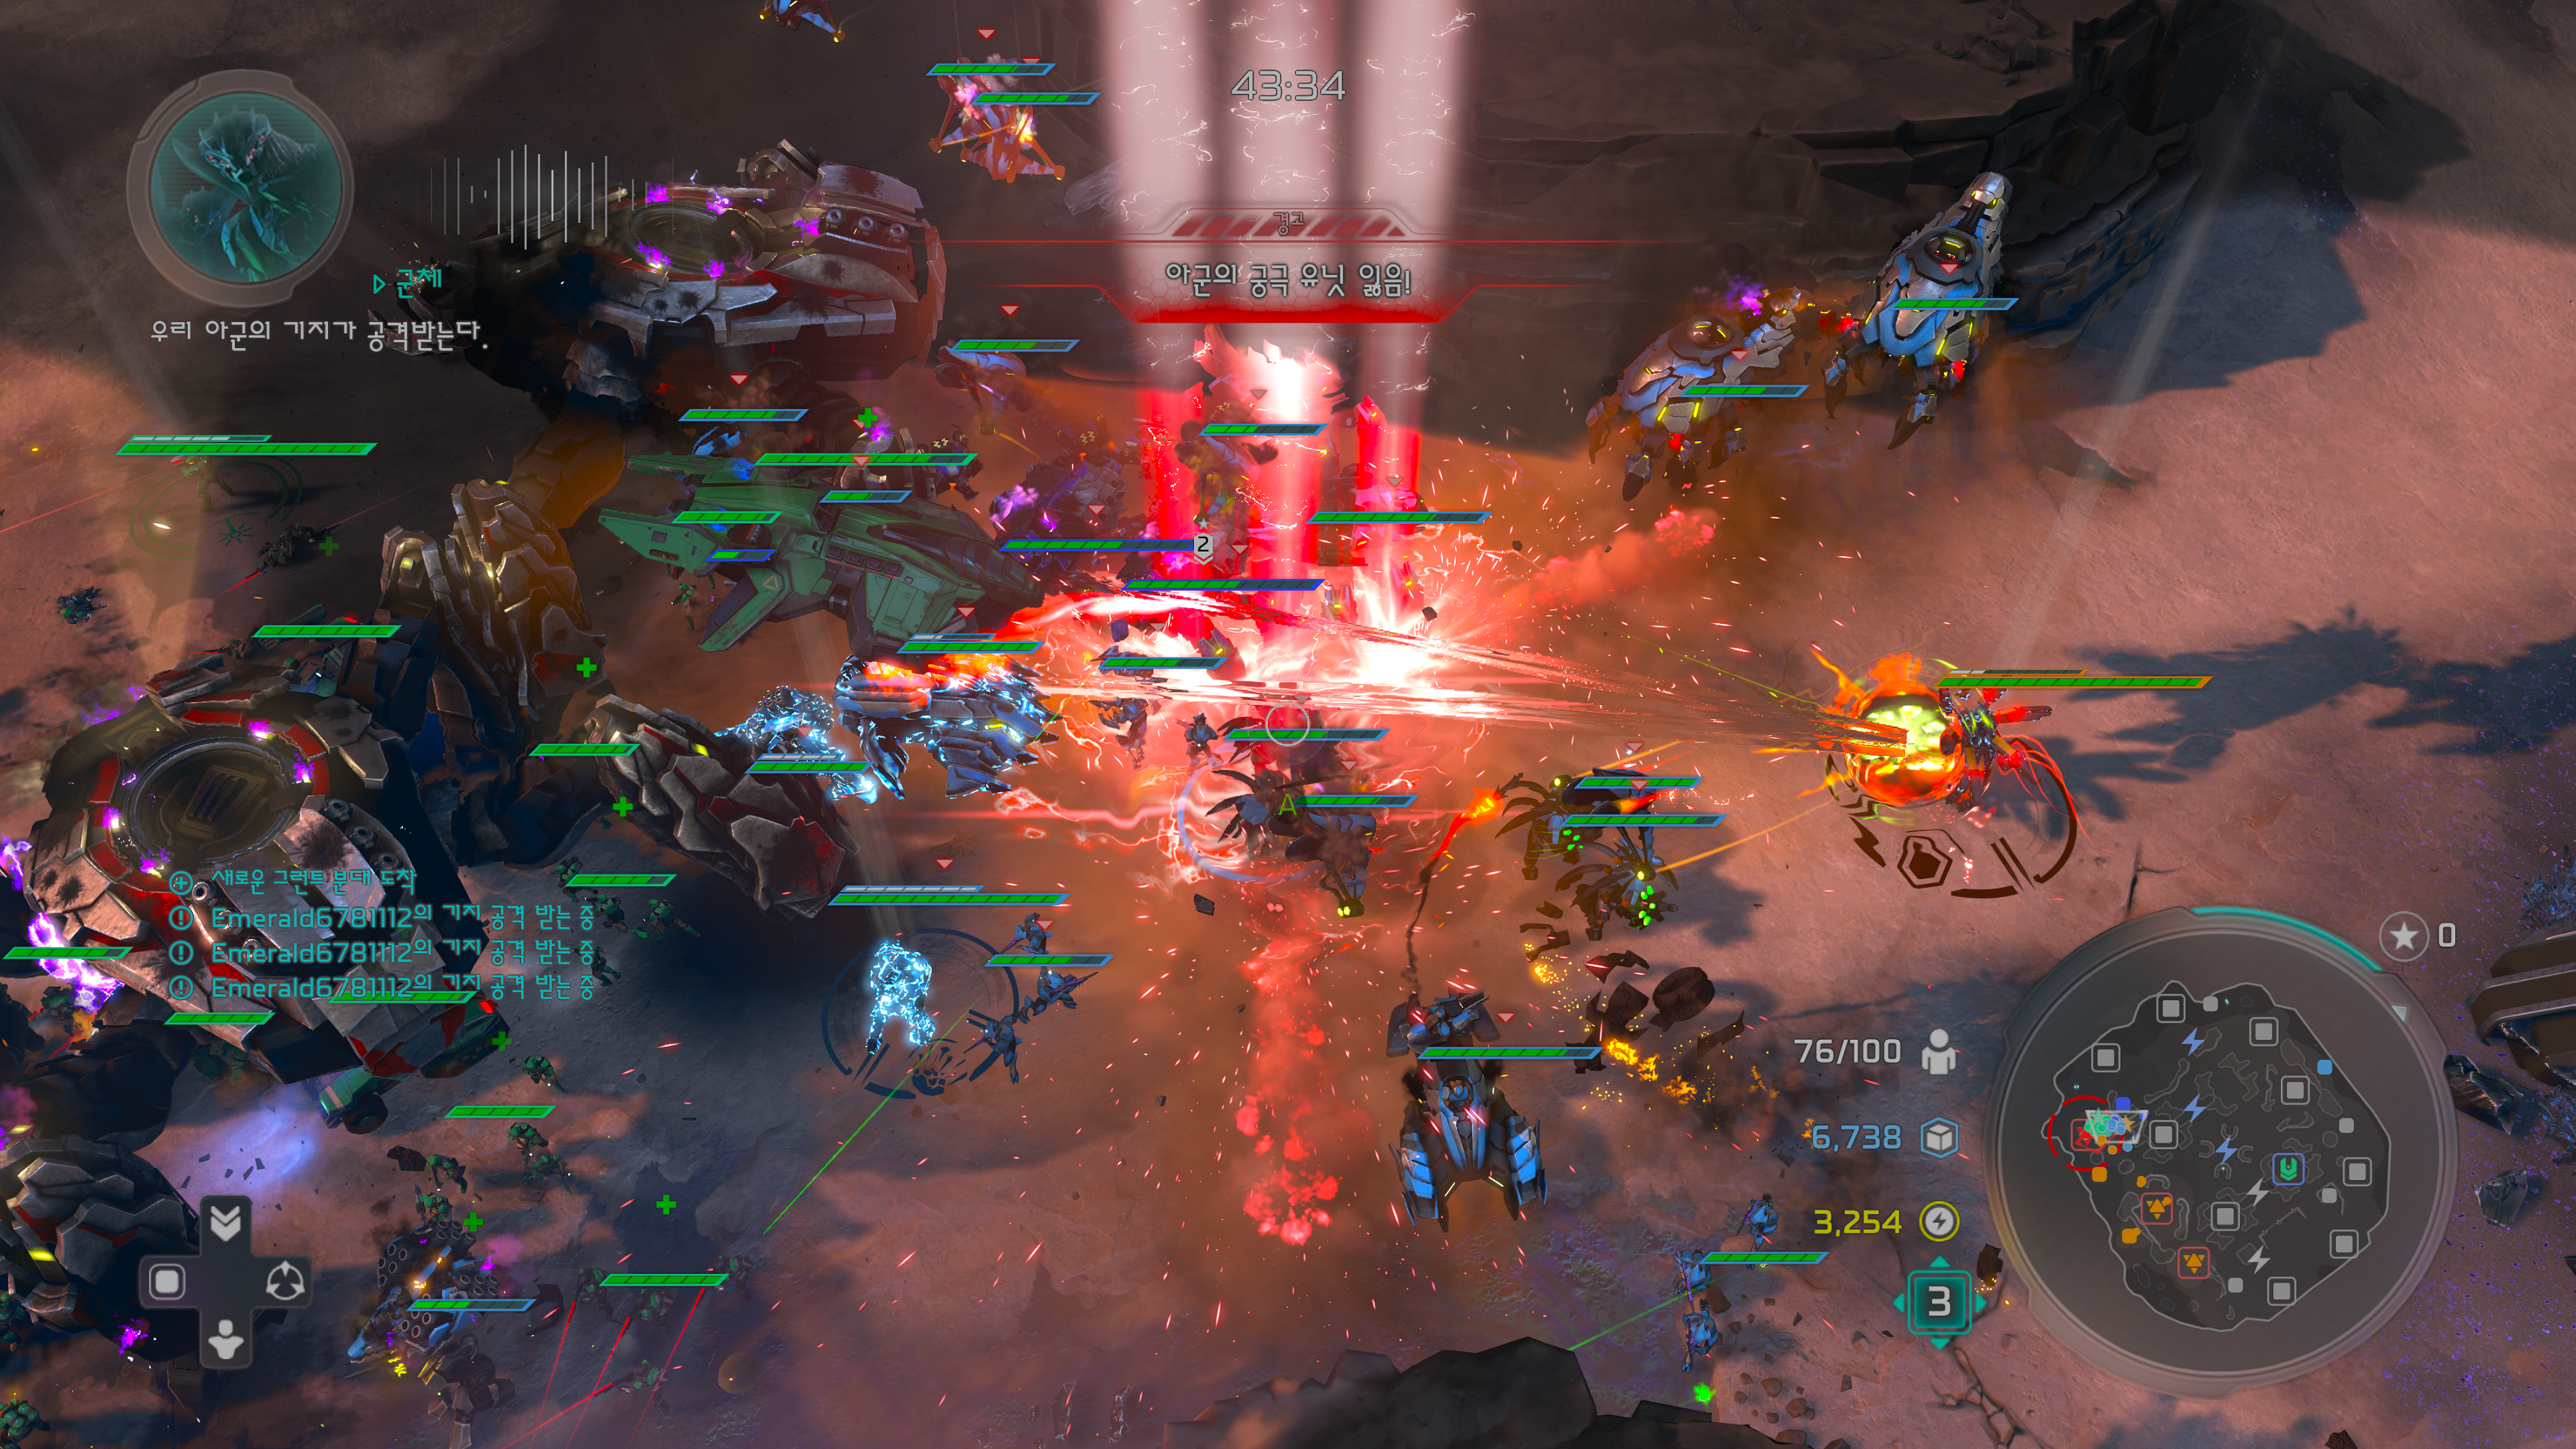 Halo Wars 2 2020-07-25 22-15-33.png